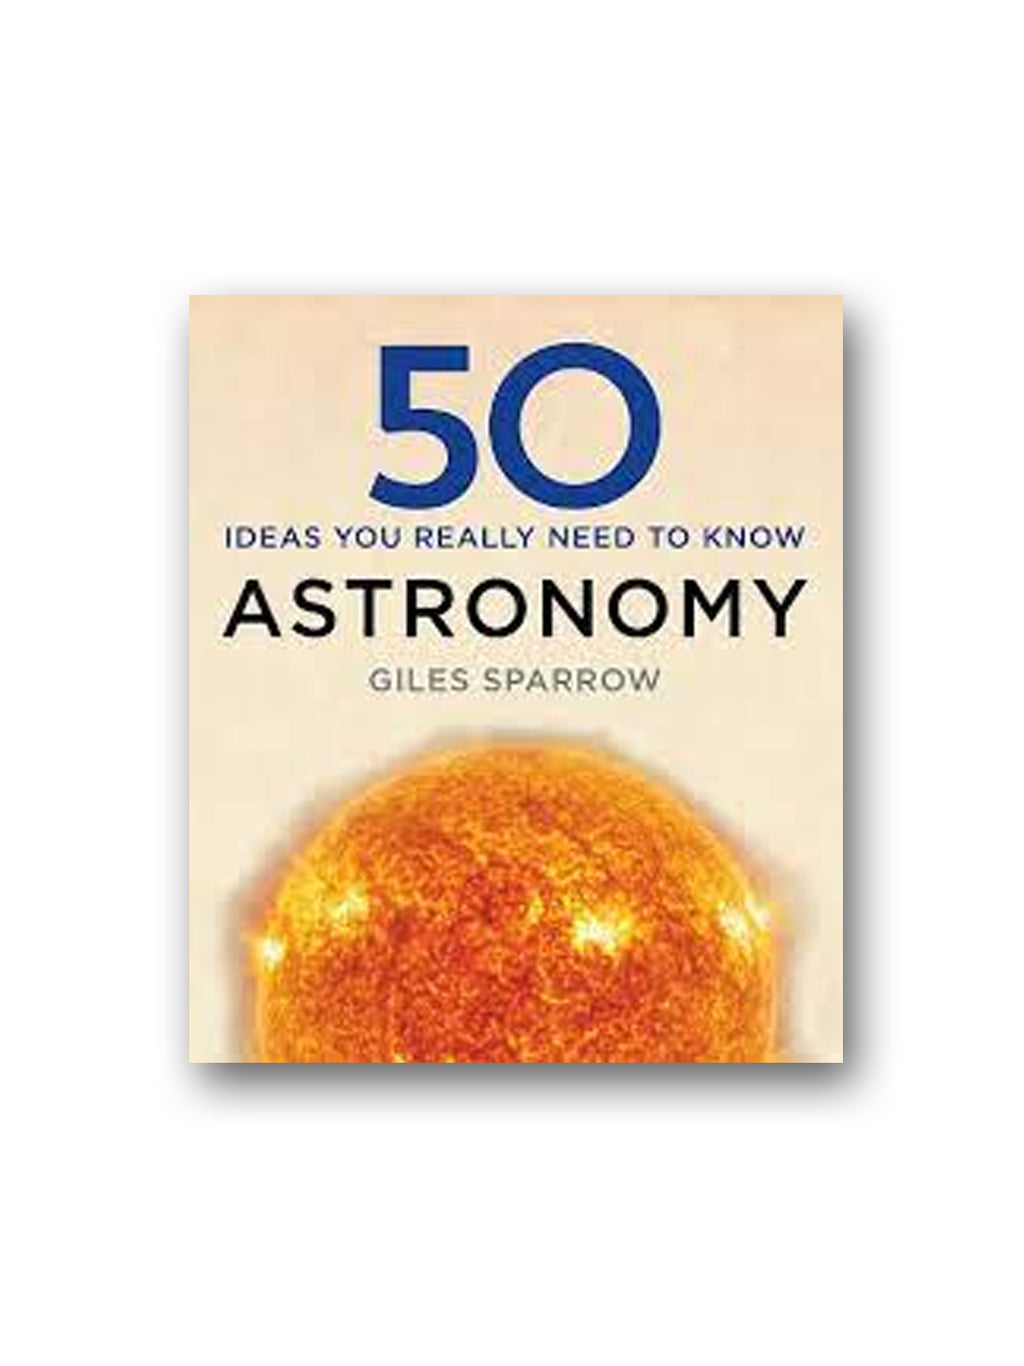 50 Astronomy Ideas You Really Need to Know